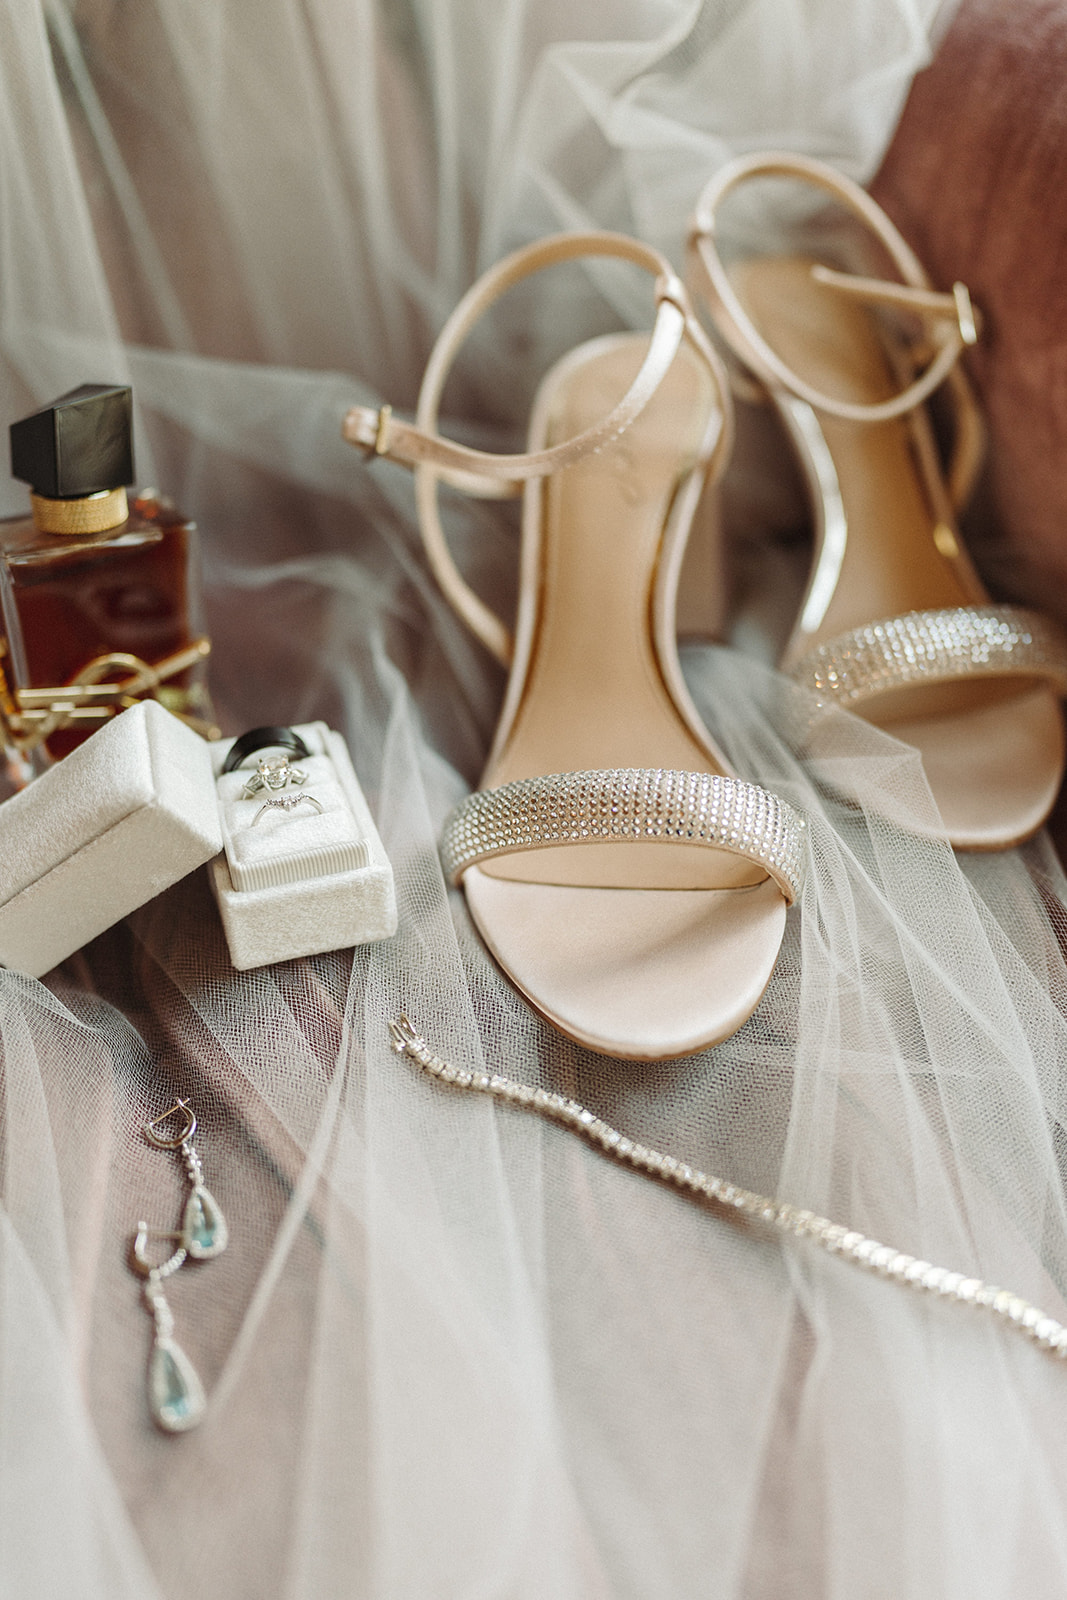 Details for an intimate wedding